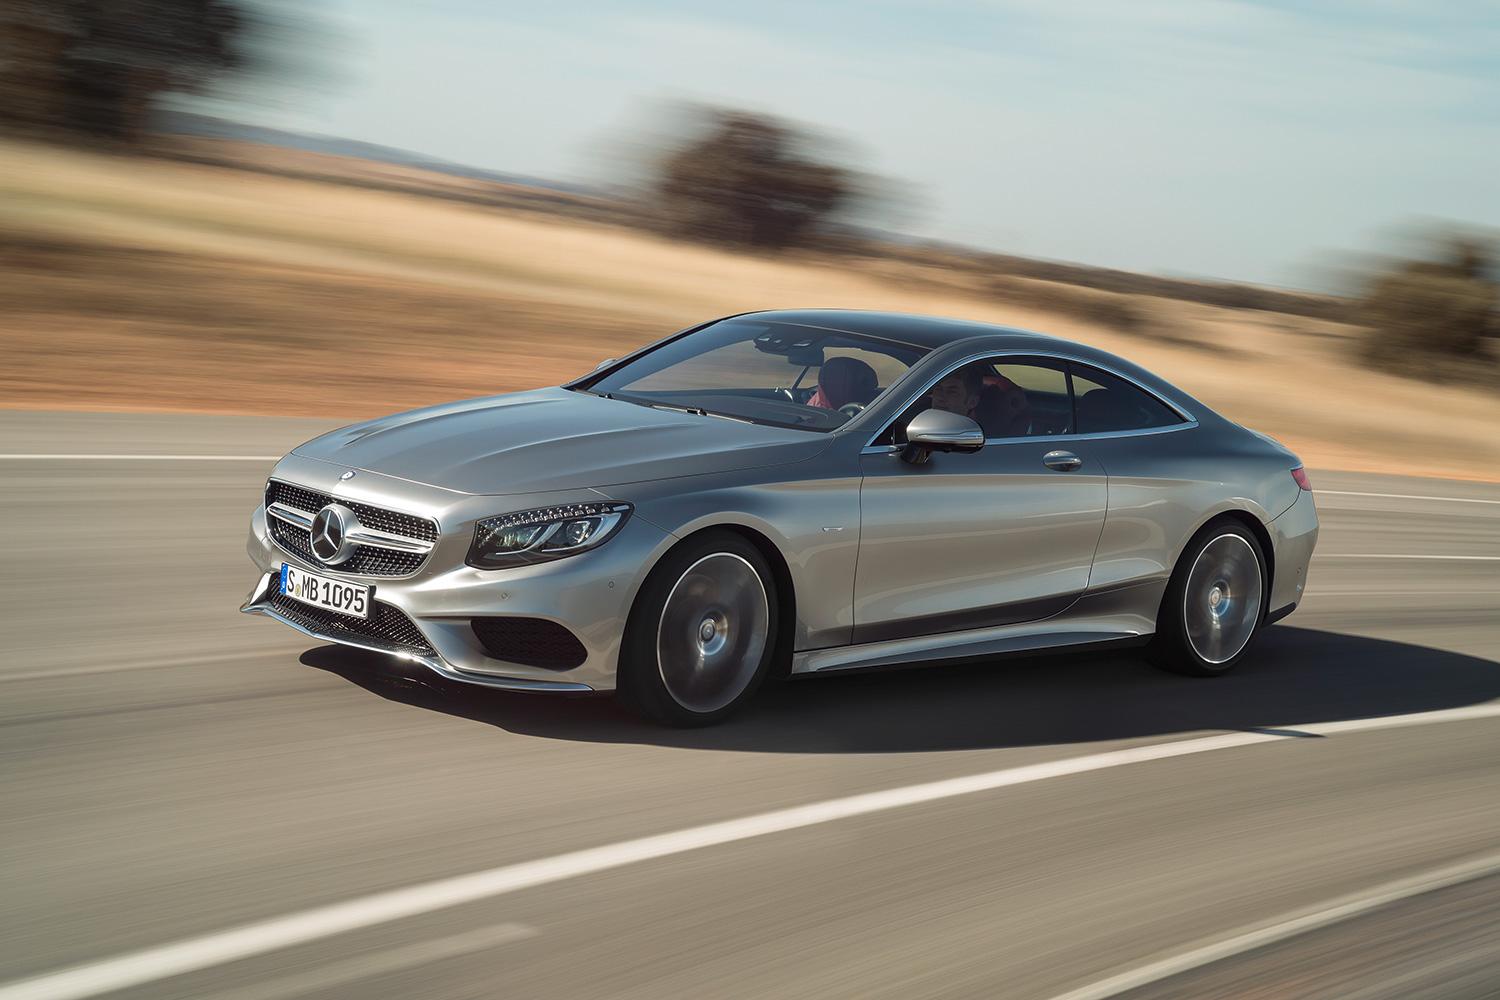 2015 Mercedes S Class Coupe right side angle